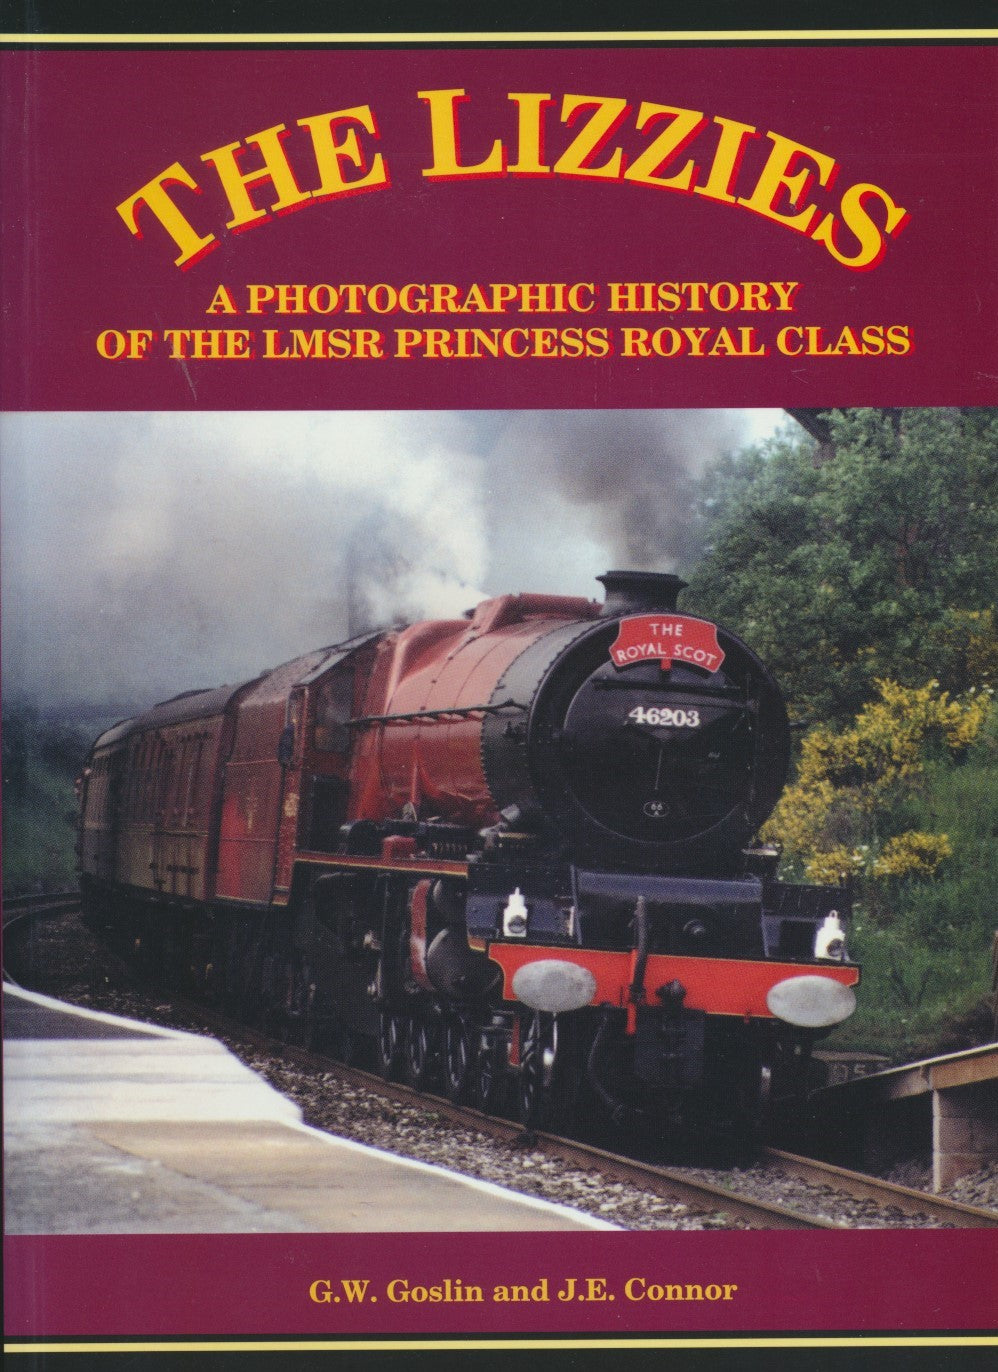 The Lizzies: A Photographic History of the LMSR Princess Royal Class